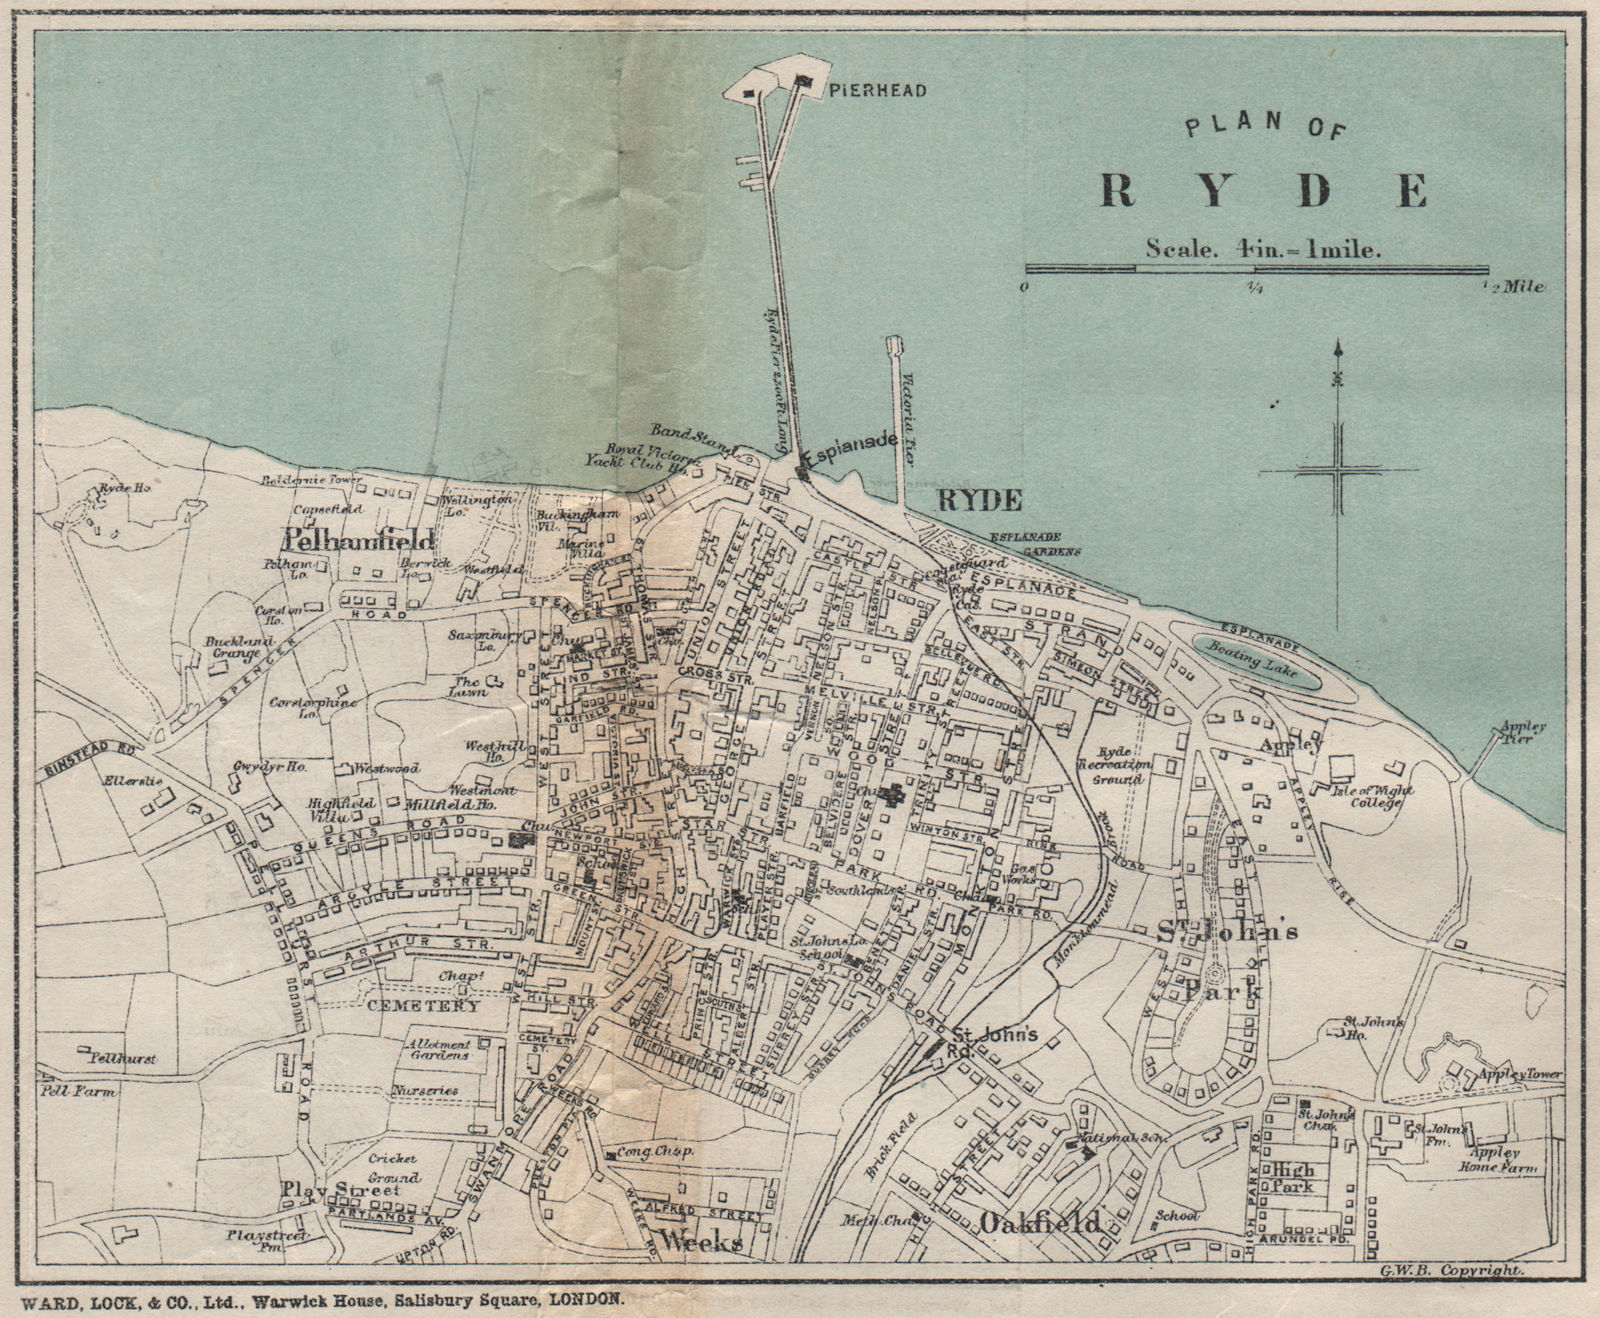 RYDE vintage town/city plan. Isle of Wight. WARD LOCK 1908 old antique map